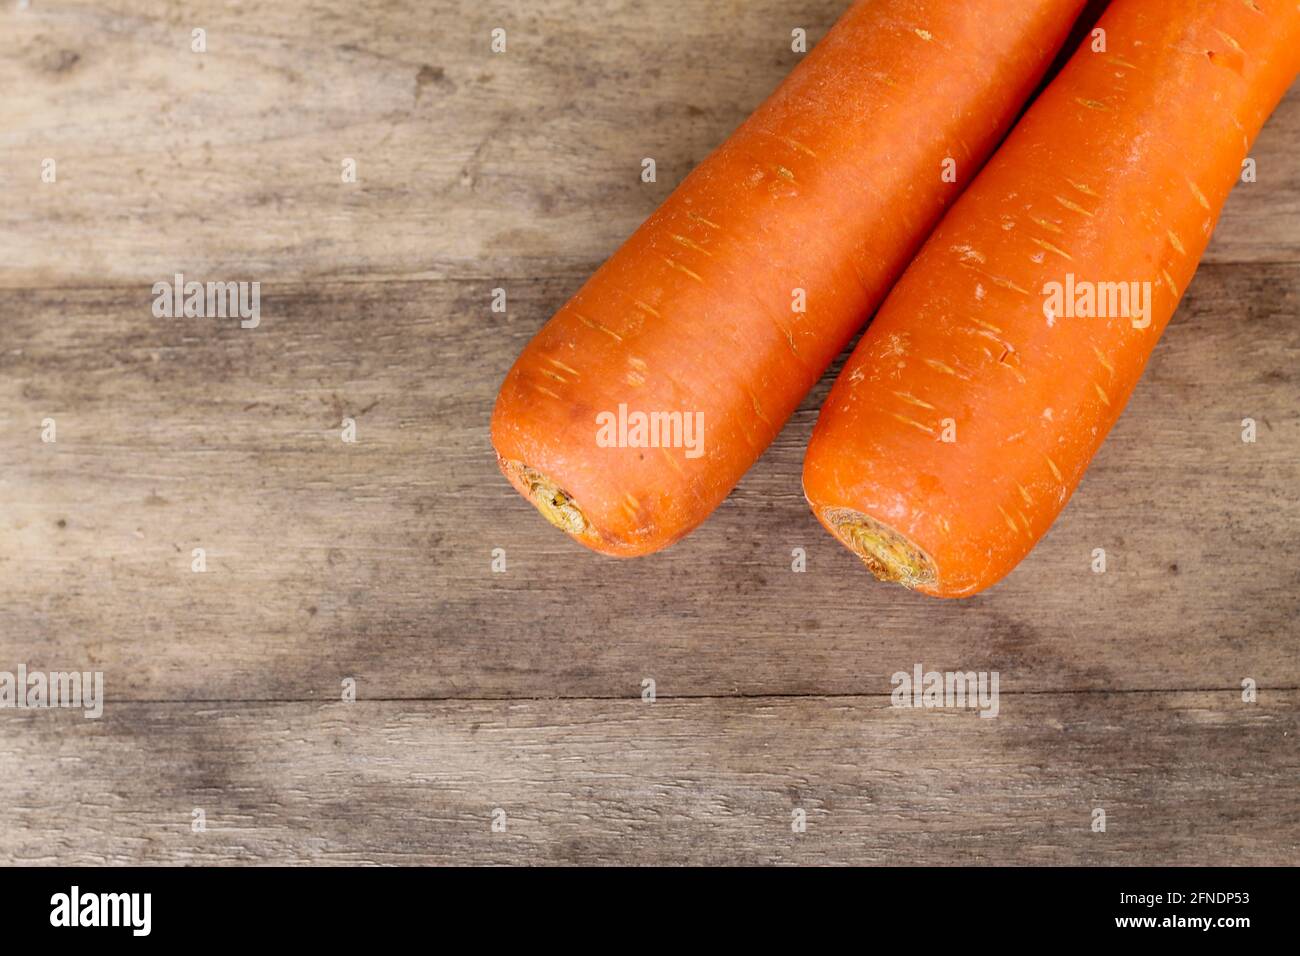 two carrots on an old wood background looks very beautiful Stock Photo